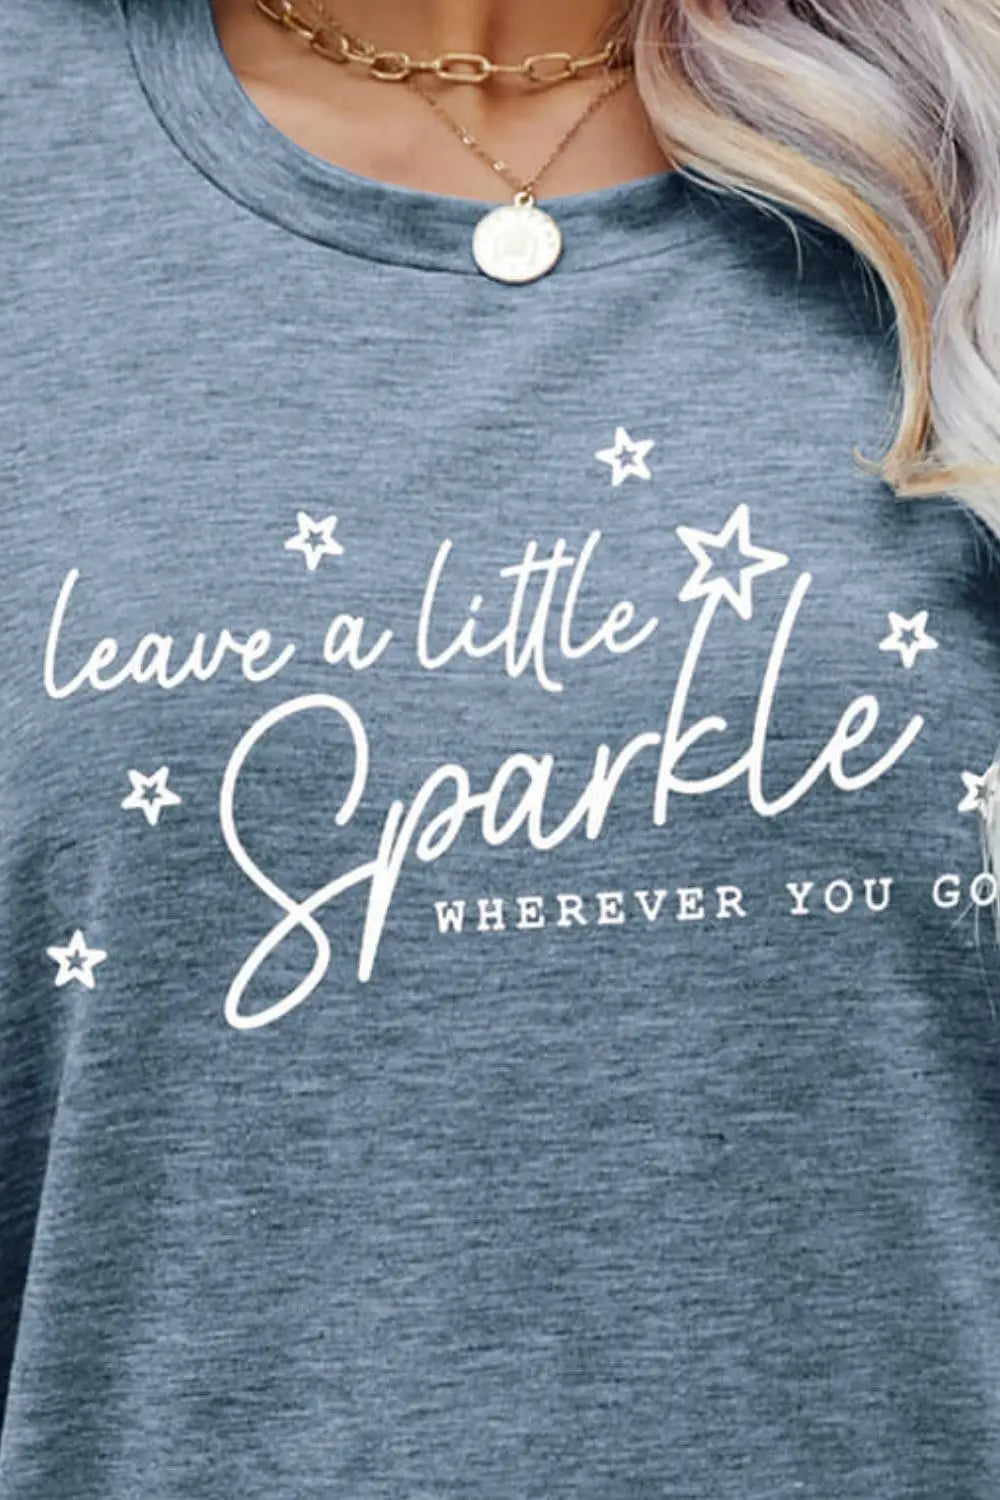 LEAVE A LITTLE SPARKLE WHEREVER YOU GO Tee Shirt - Image #12